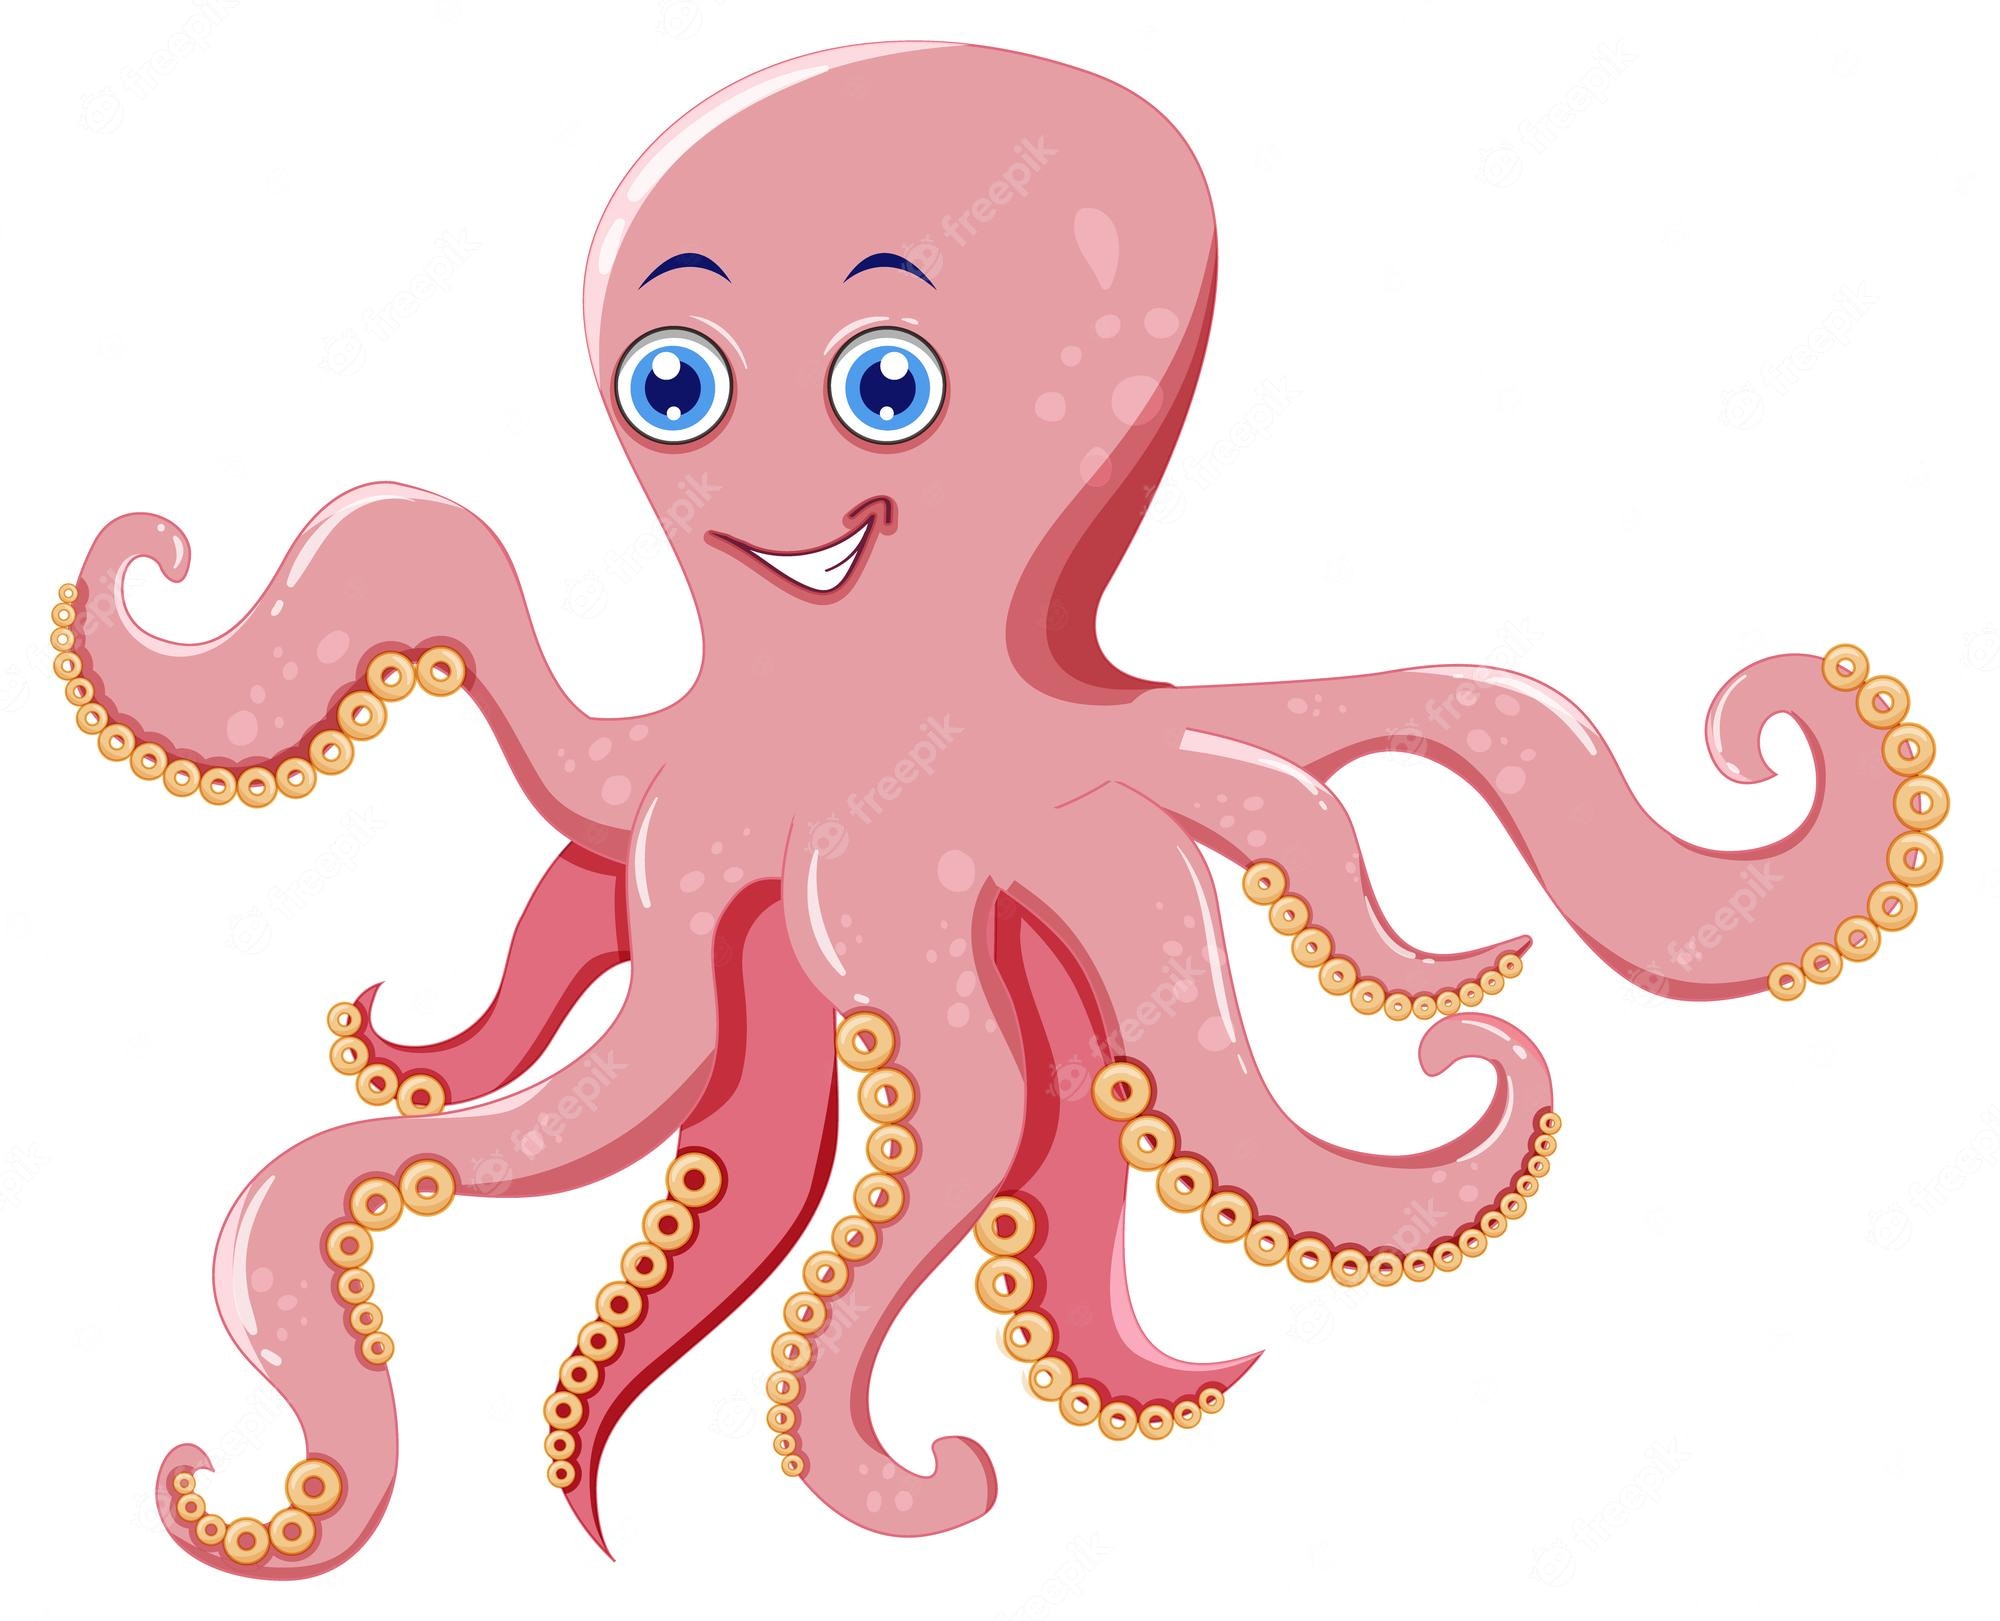 octopus drawings - Clip Art Library